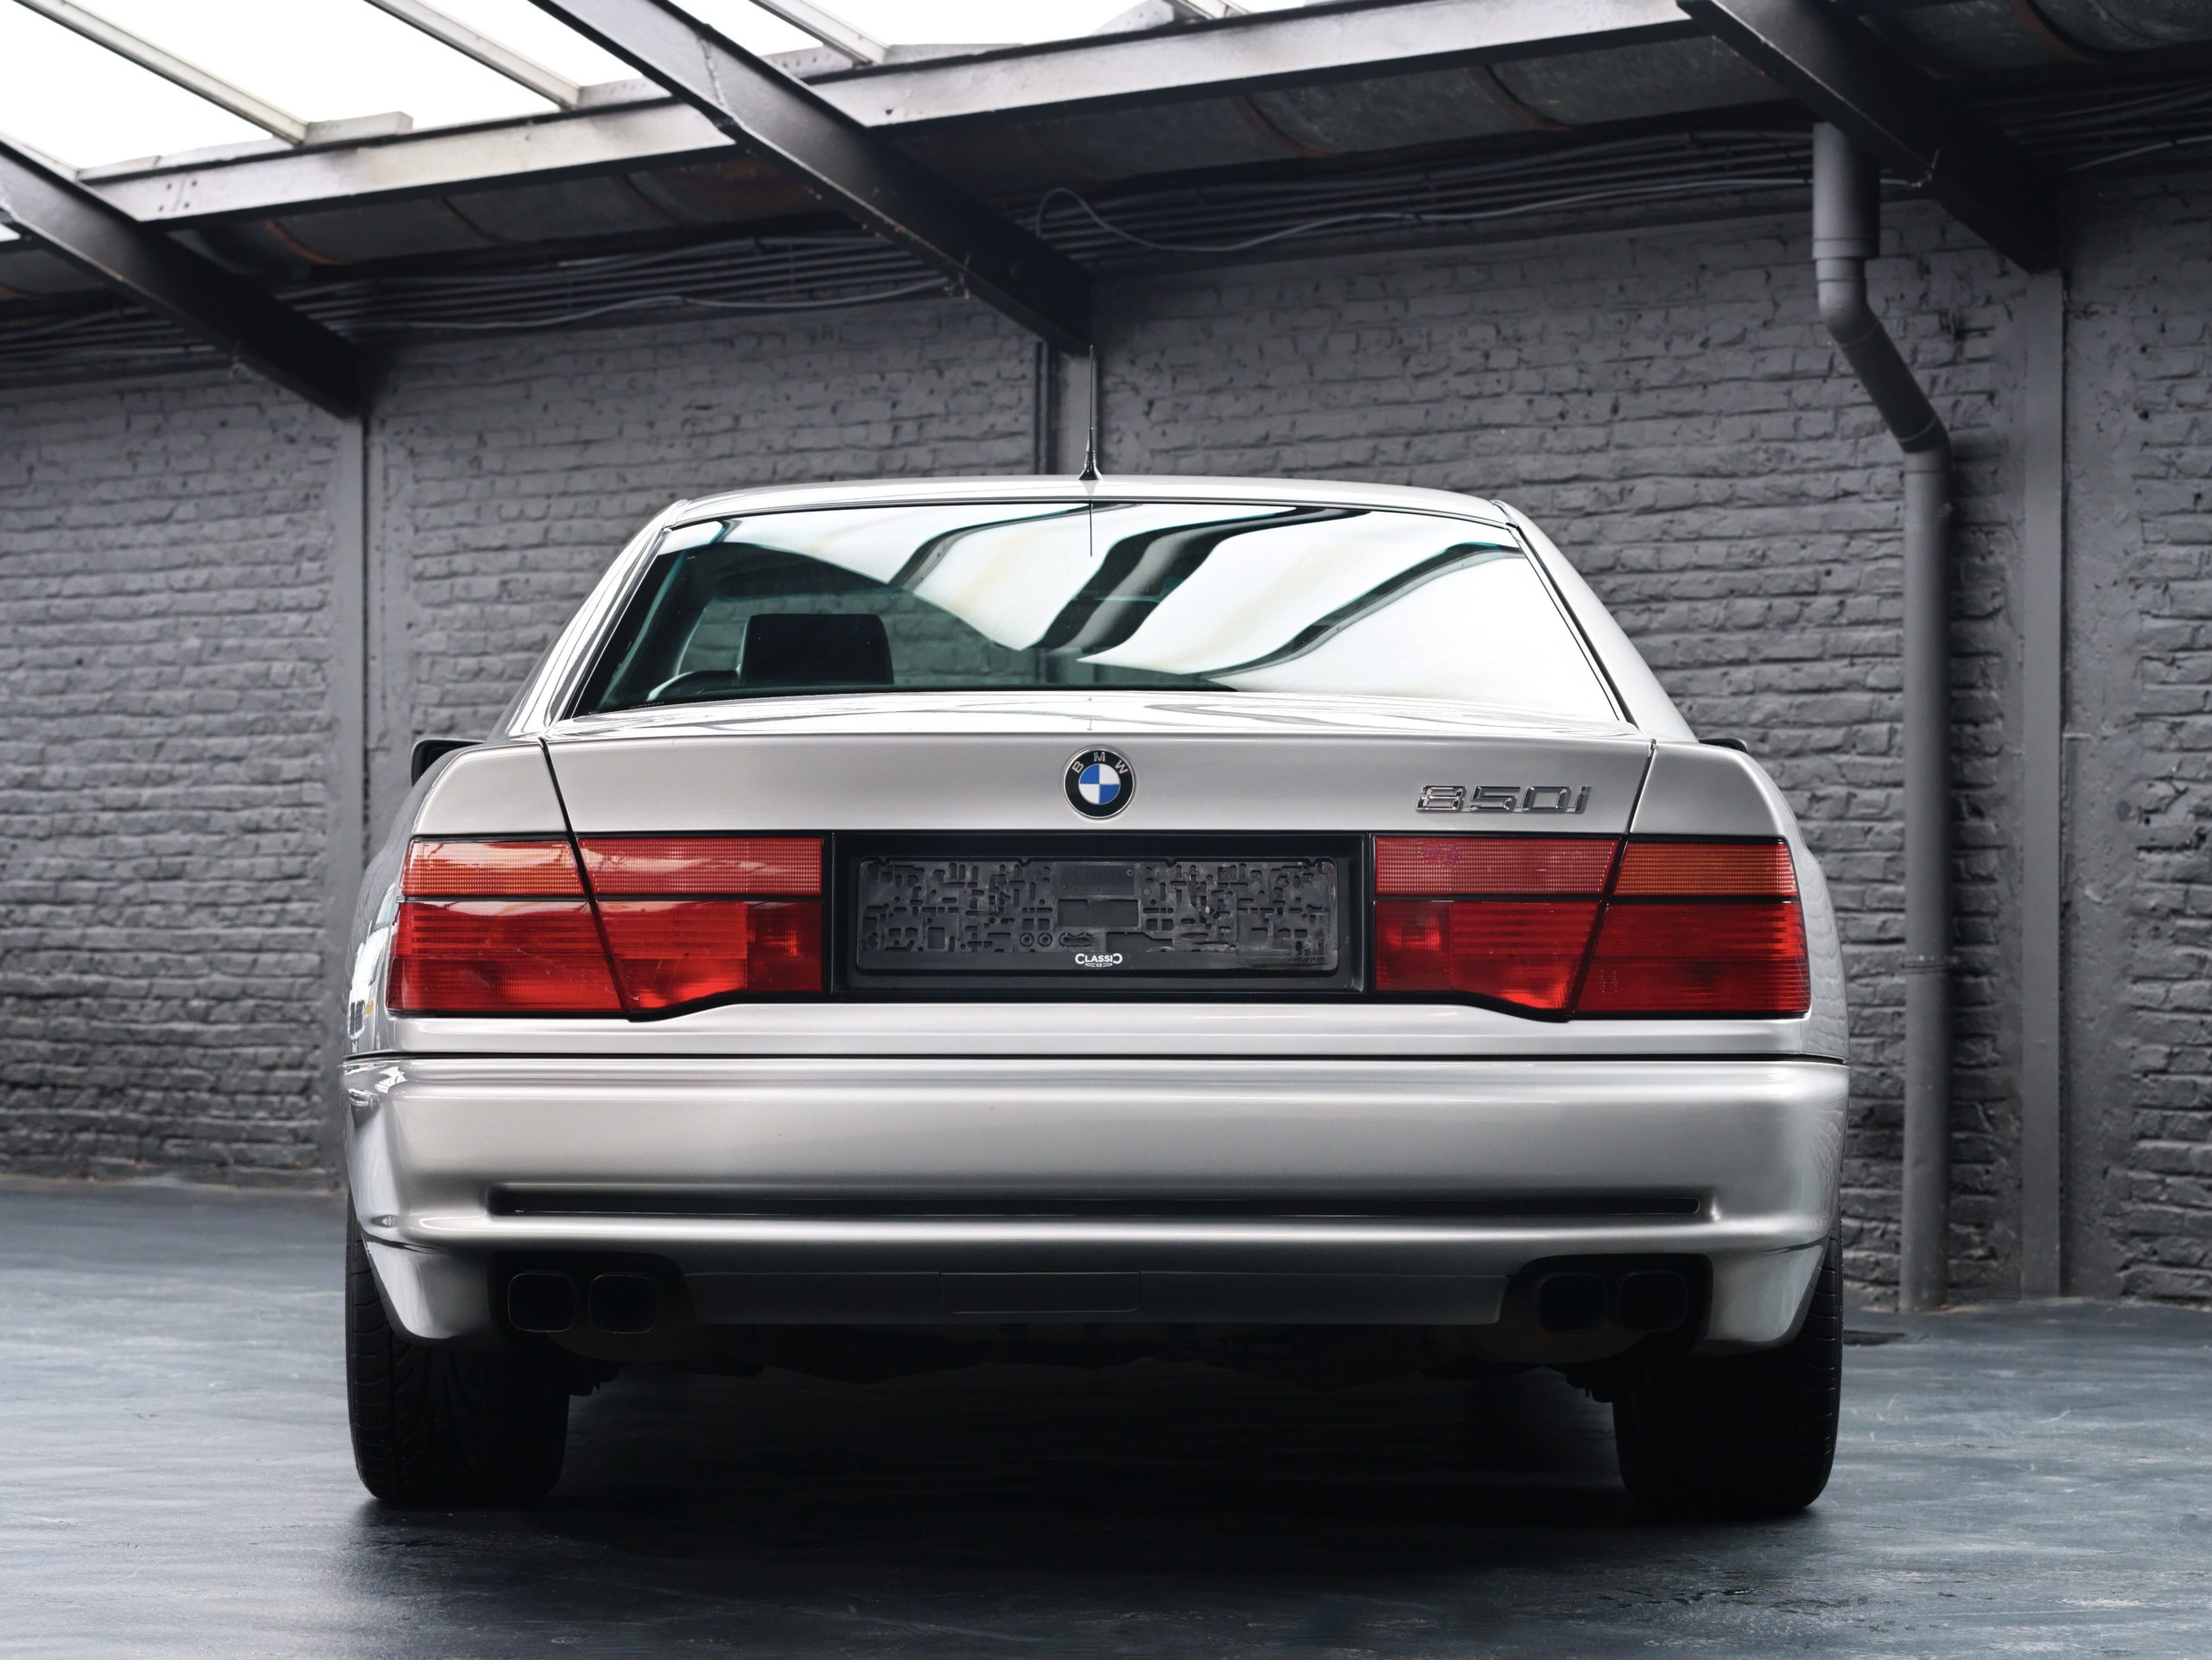 rear view of a 1991 BMW 850i 6 speed manual for sale with Classic 42 Belgium